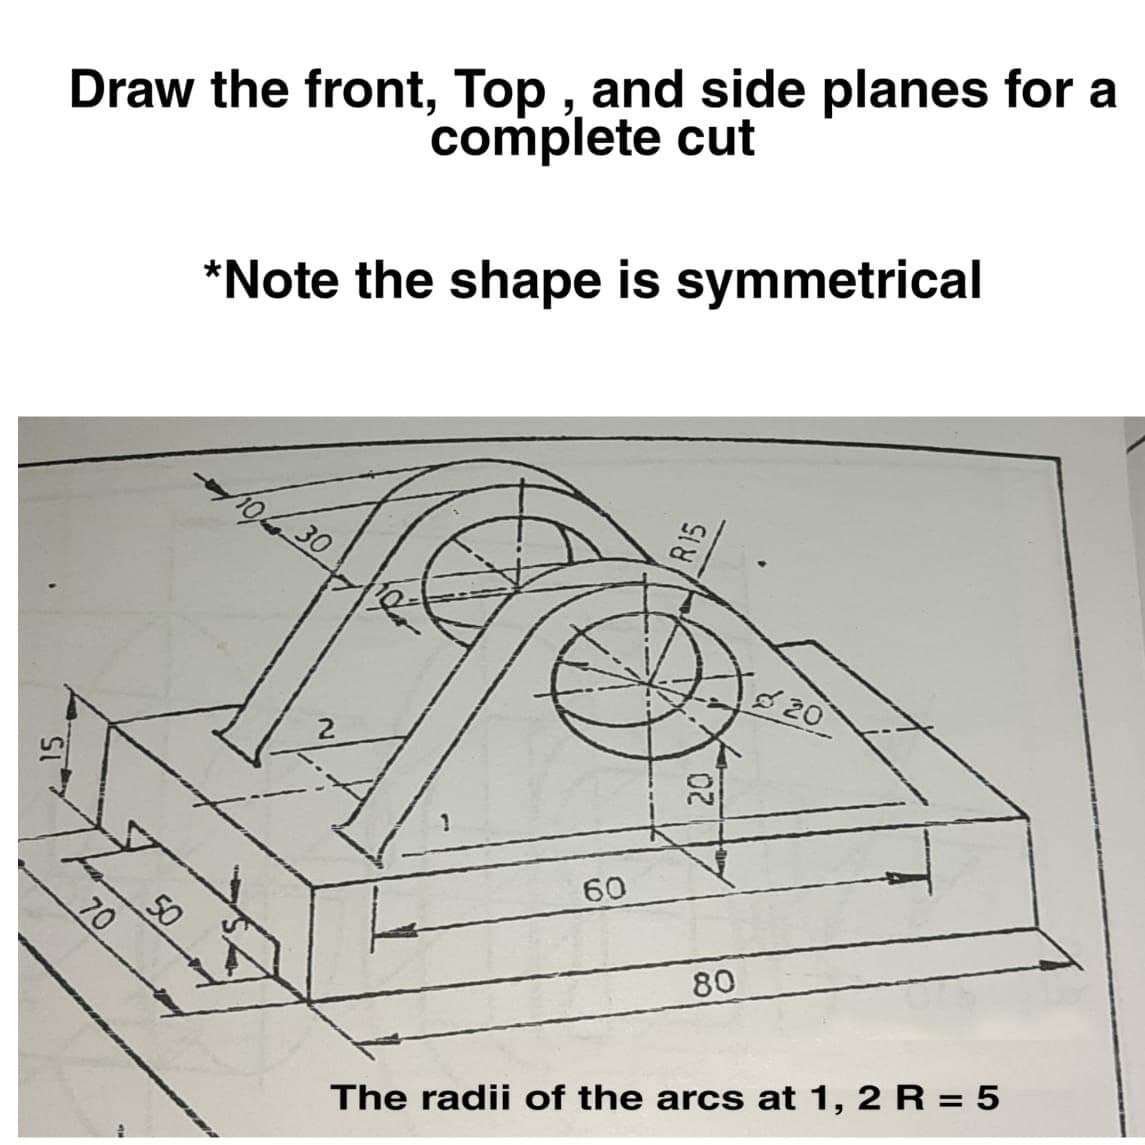 Draw the front, Top , and side planes for a
complete cut
*Note the shape is symmetrical
19630
820
20
60
50
80
The radii of the arcs at 1, 2 R = 5
R15
70
